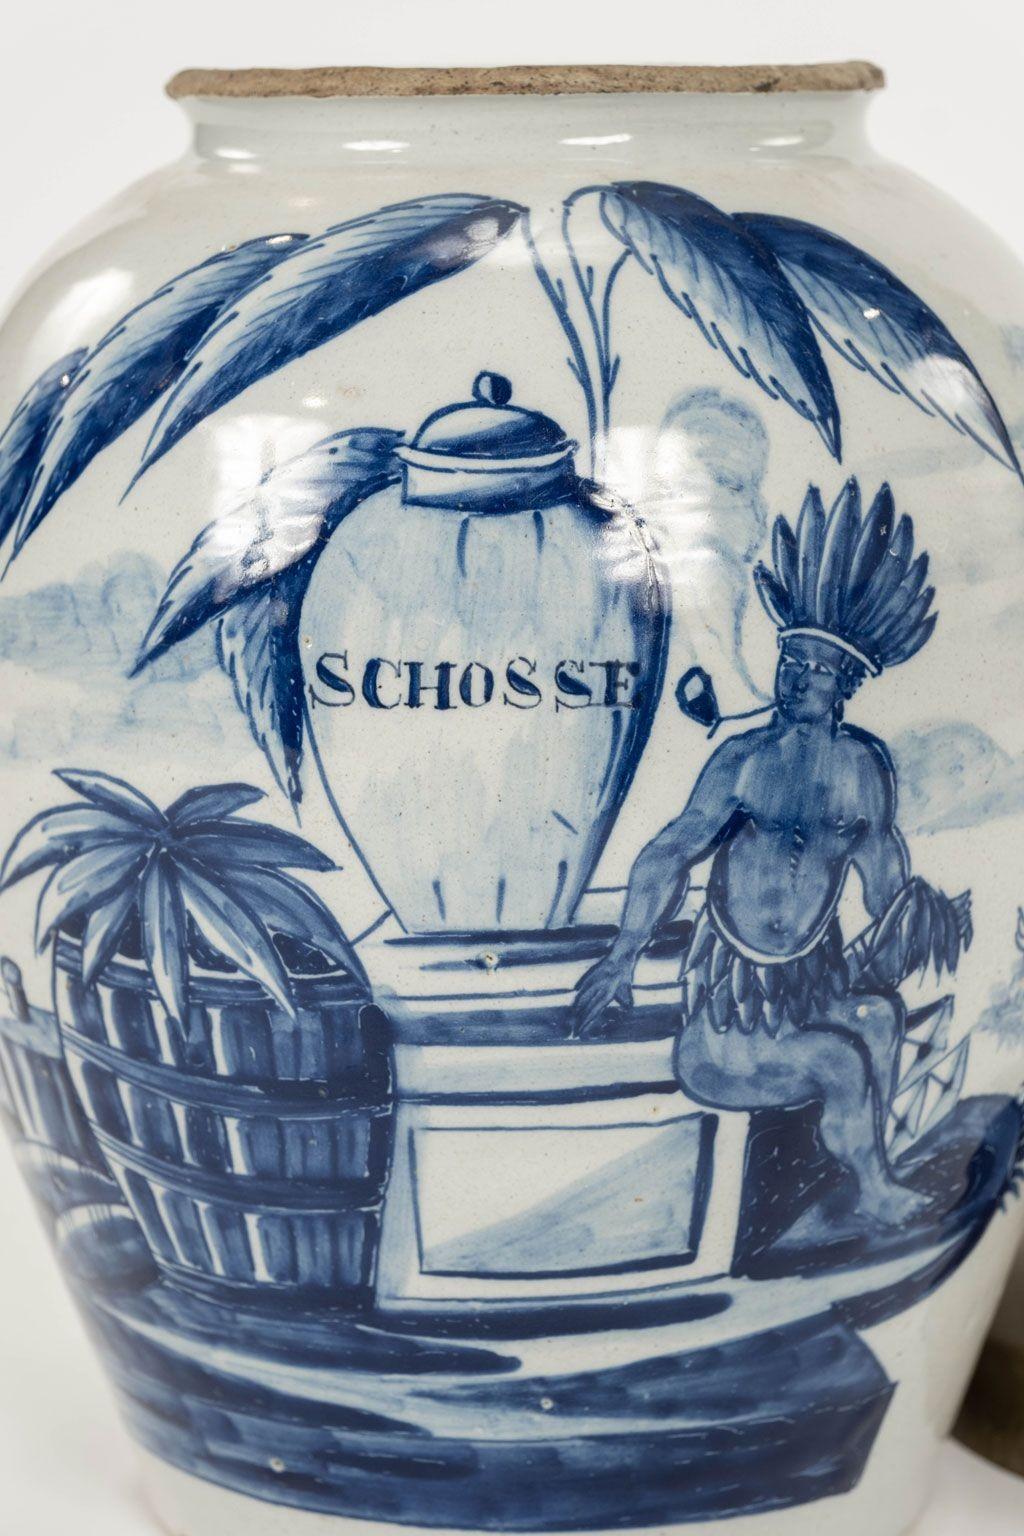 Delft blue and white “Schosse” urn-shape tobacco jar with lid, Netherlands, circa 1780. Decorated with coastal scene and seated “Amerindian” figure. Simple low brass lid with excellent patina and turned-style knob handle.

Note: Original/early